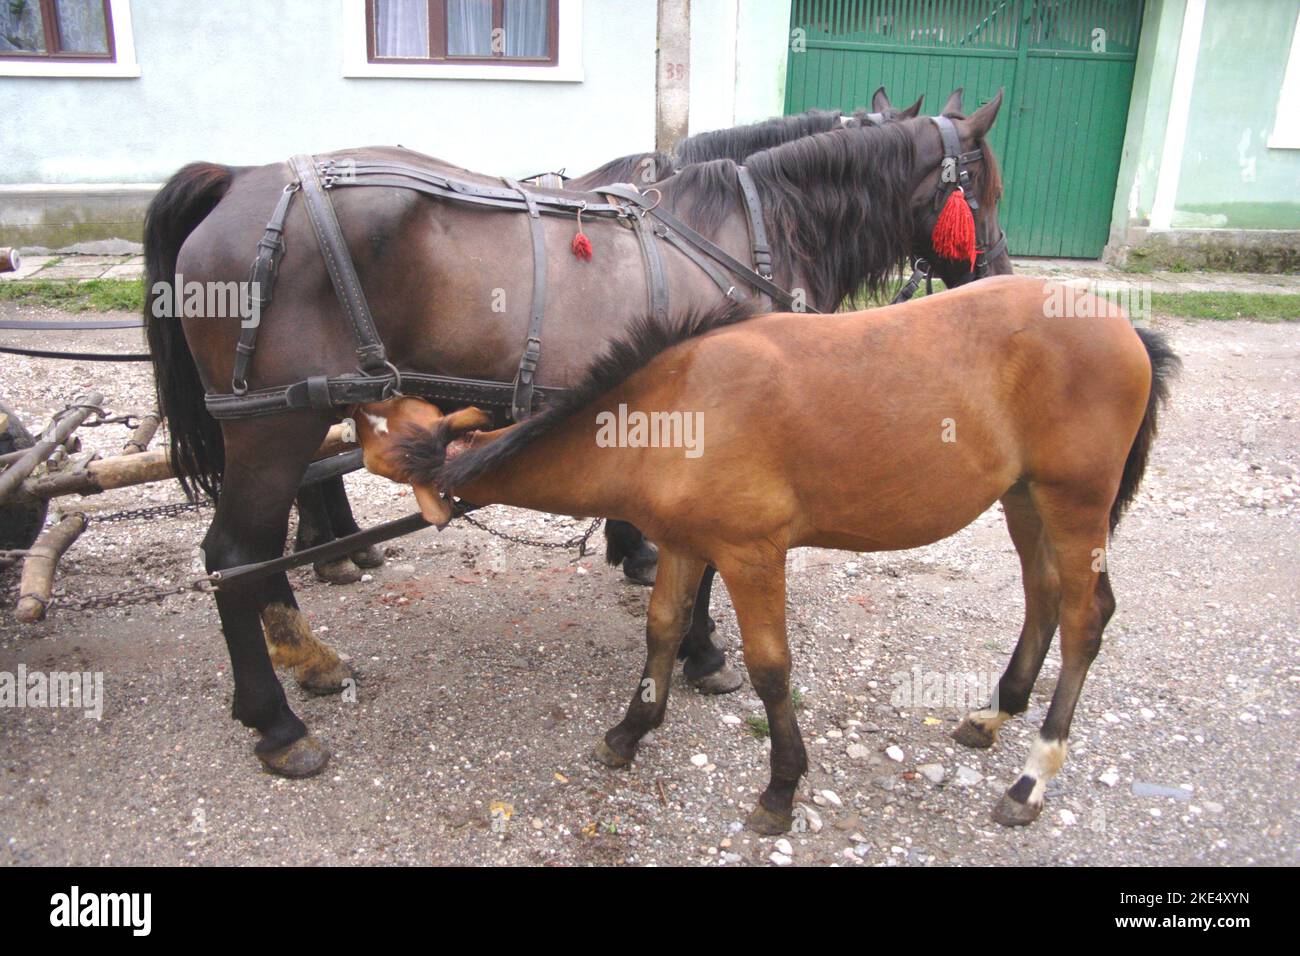 Foal suckling from its mother, a village in Transylvania, Romania Stock Photo